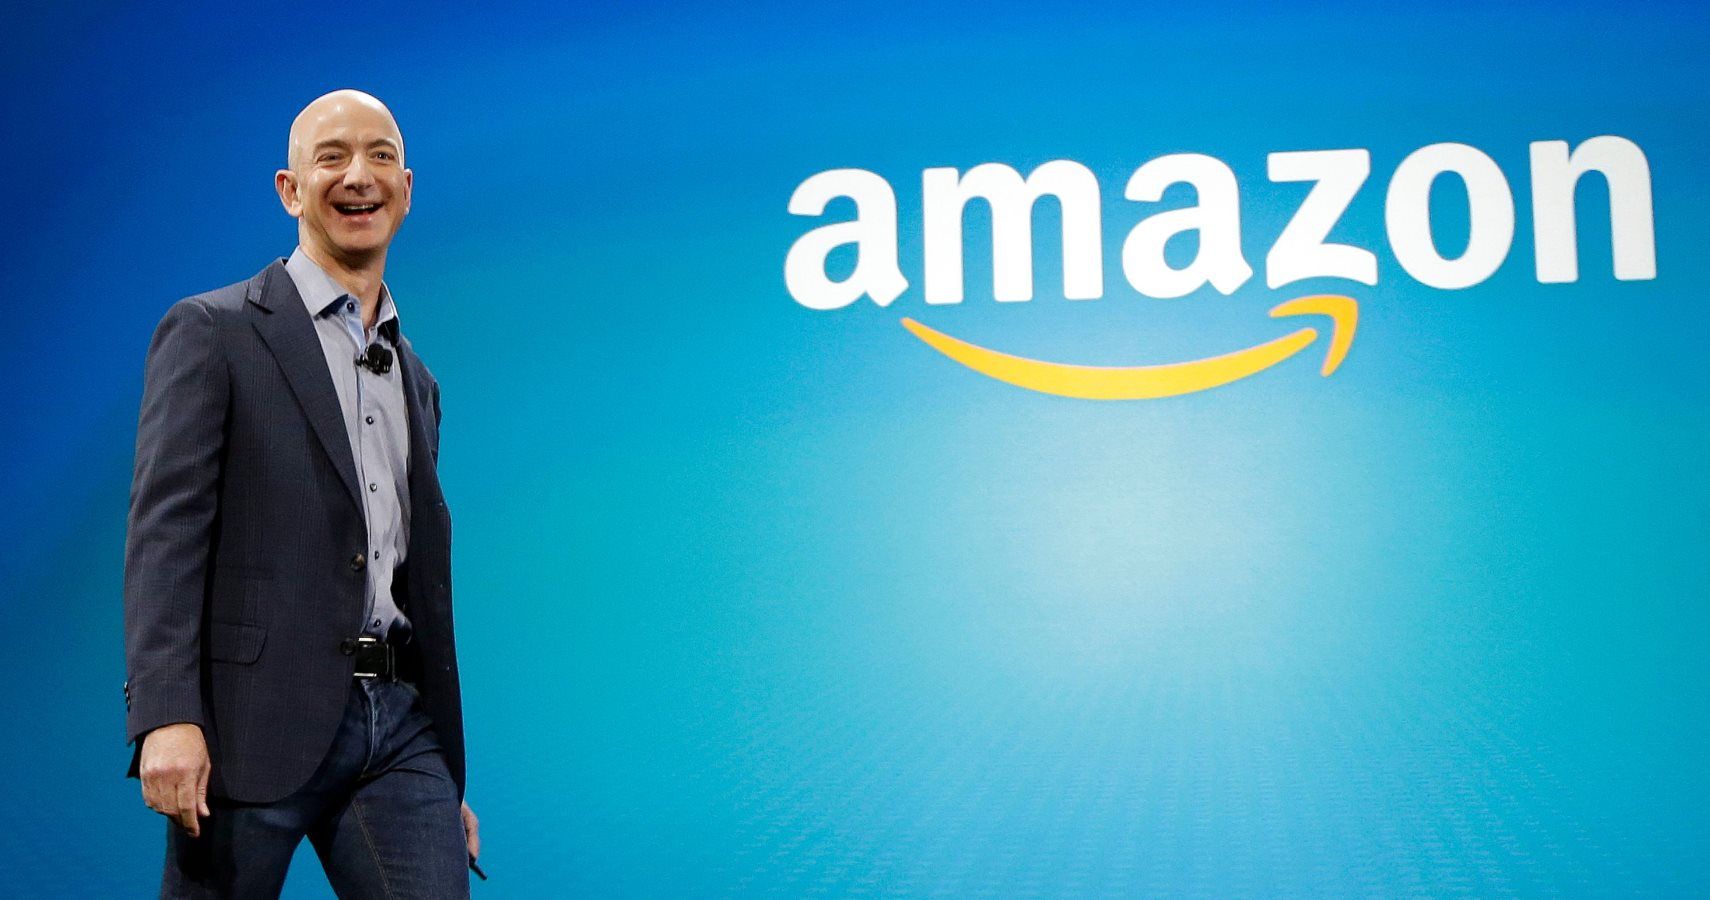 Amazon.com Billionaire Spends Tiny Fraction Of His Fortune To Fund Schools, Fight Homelessness